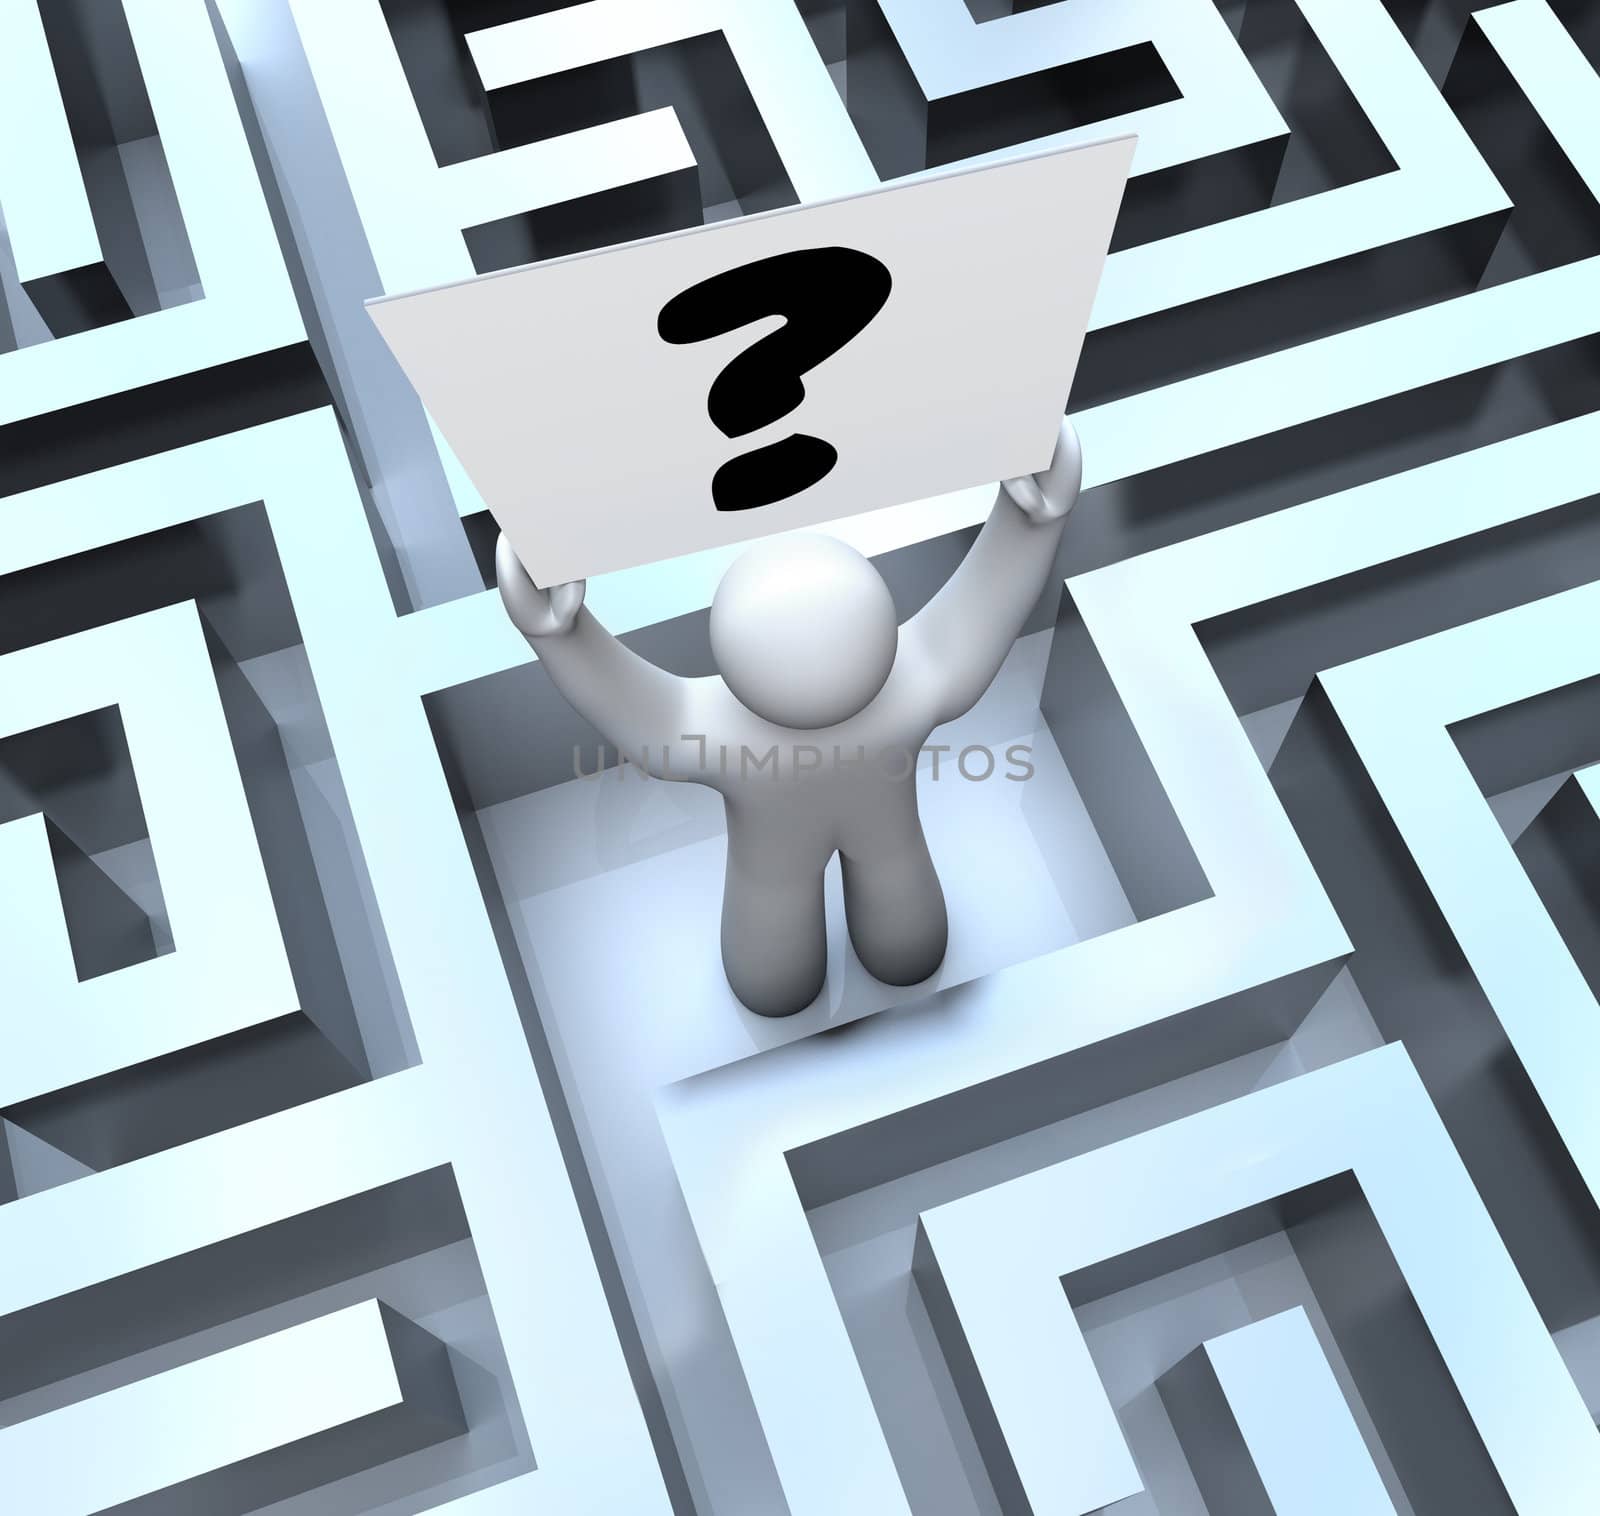 A man lost in a maze or labyrinth holds a question mark sign to seek help in finding a way out or getting an answer or solution to a problem or trouble